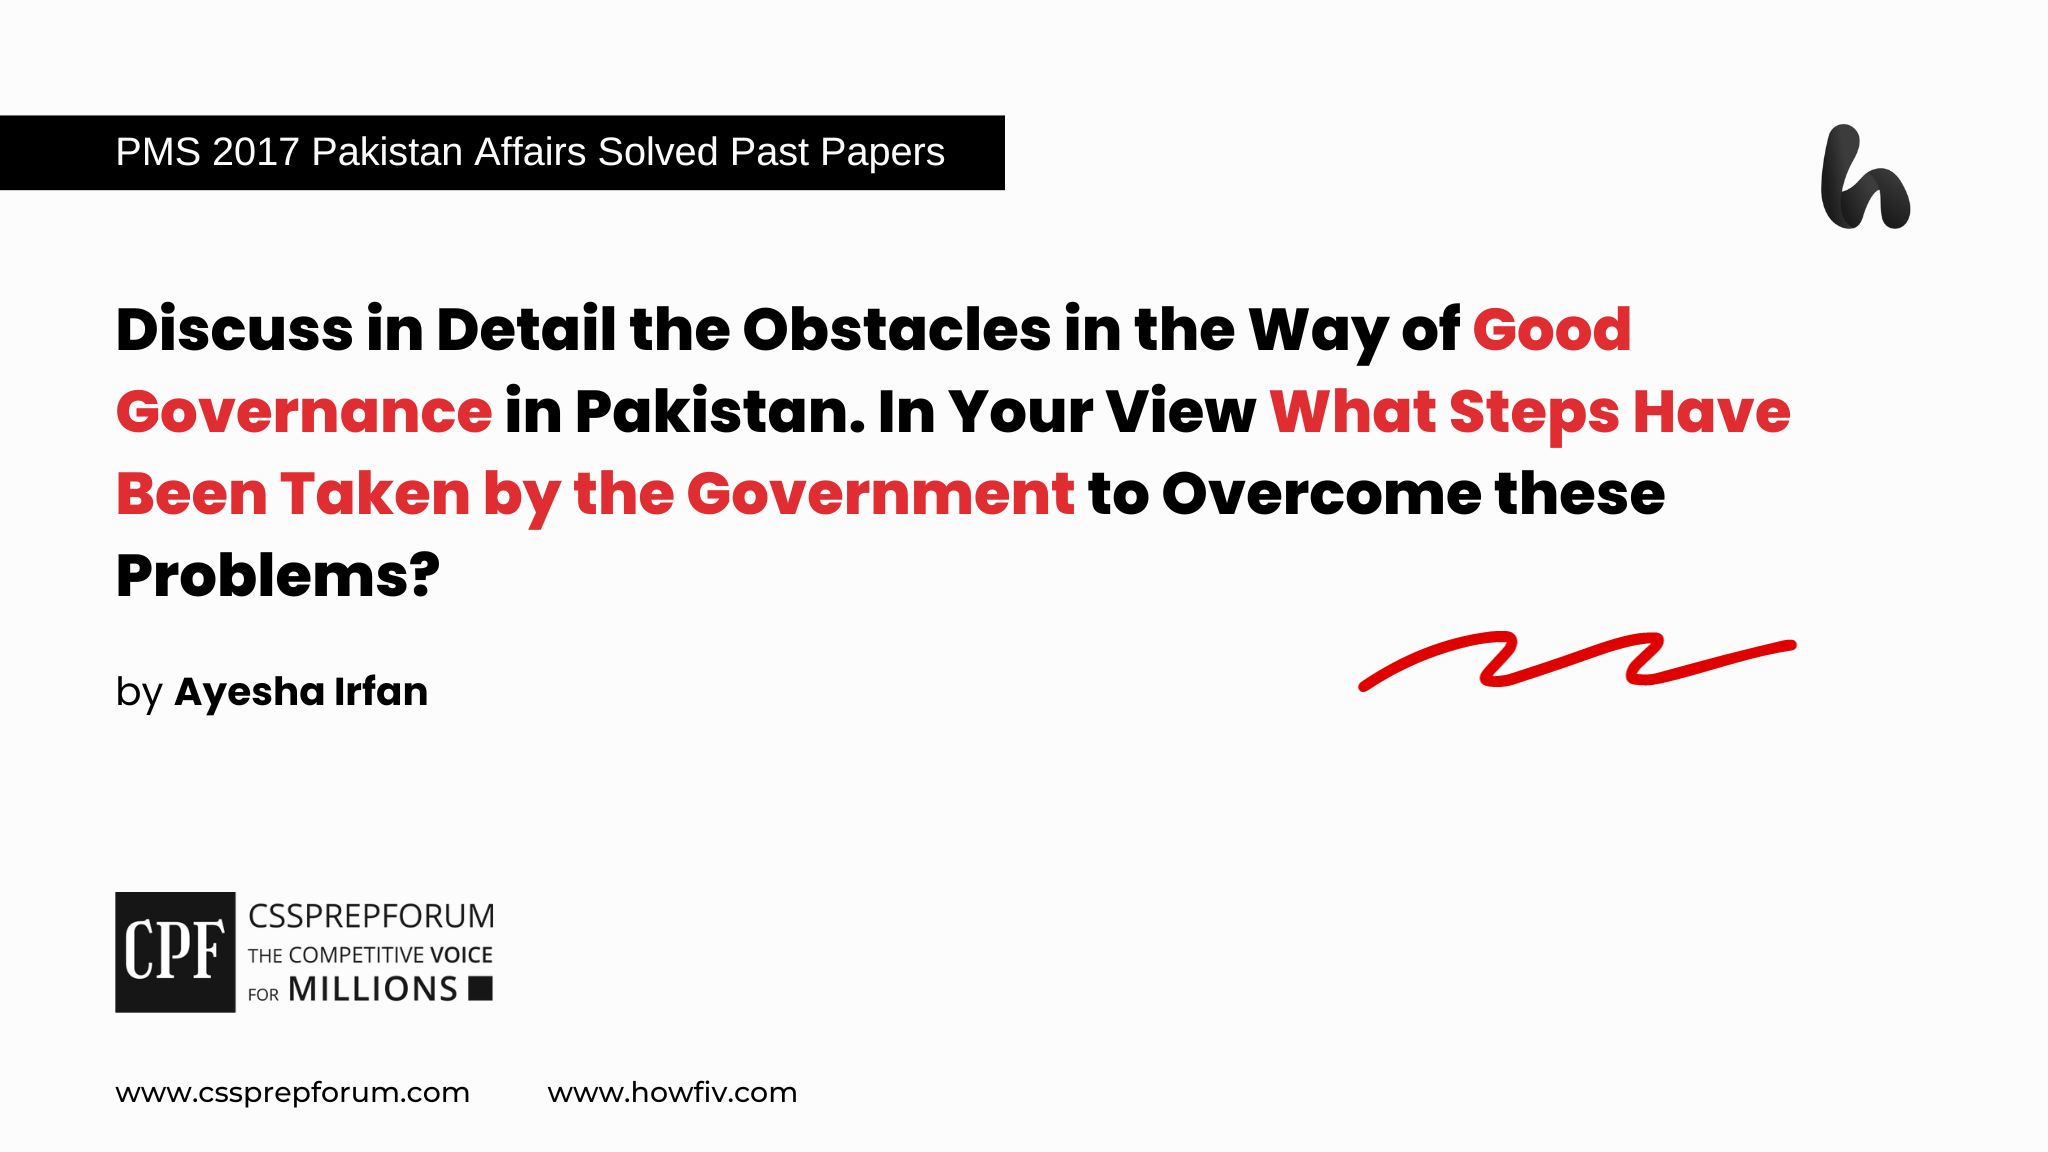 Discuss in Detail the Obstacles in the Way of Good Governance in Pakistan. In Your View What Steps Have Been Taken by the Government to Overcome these Problems